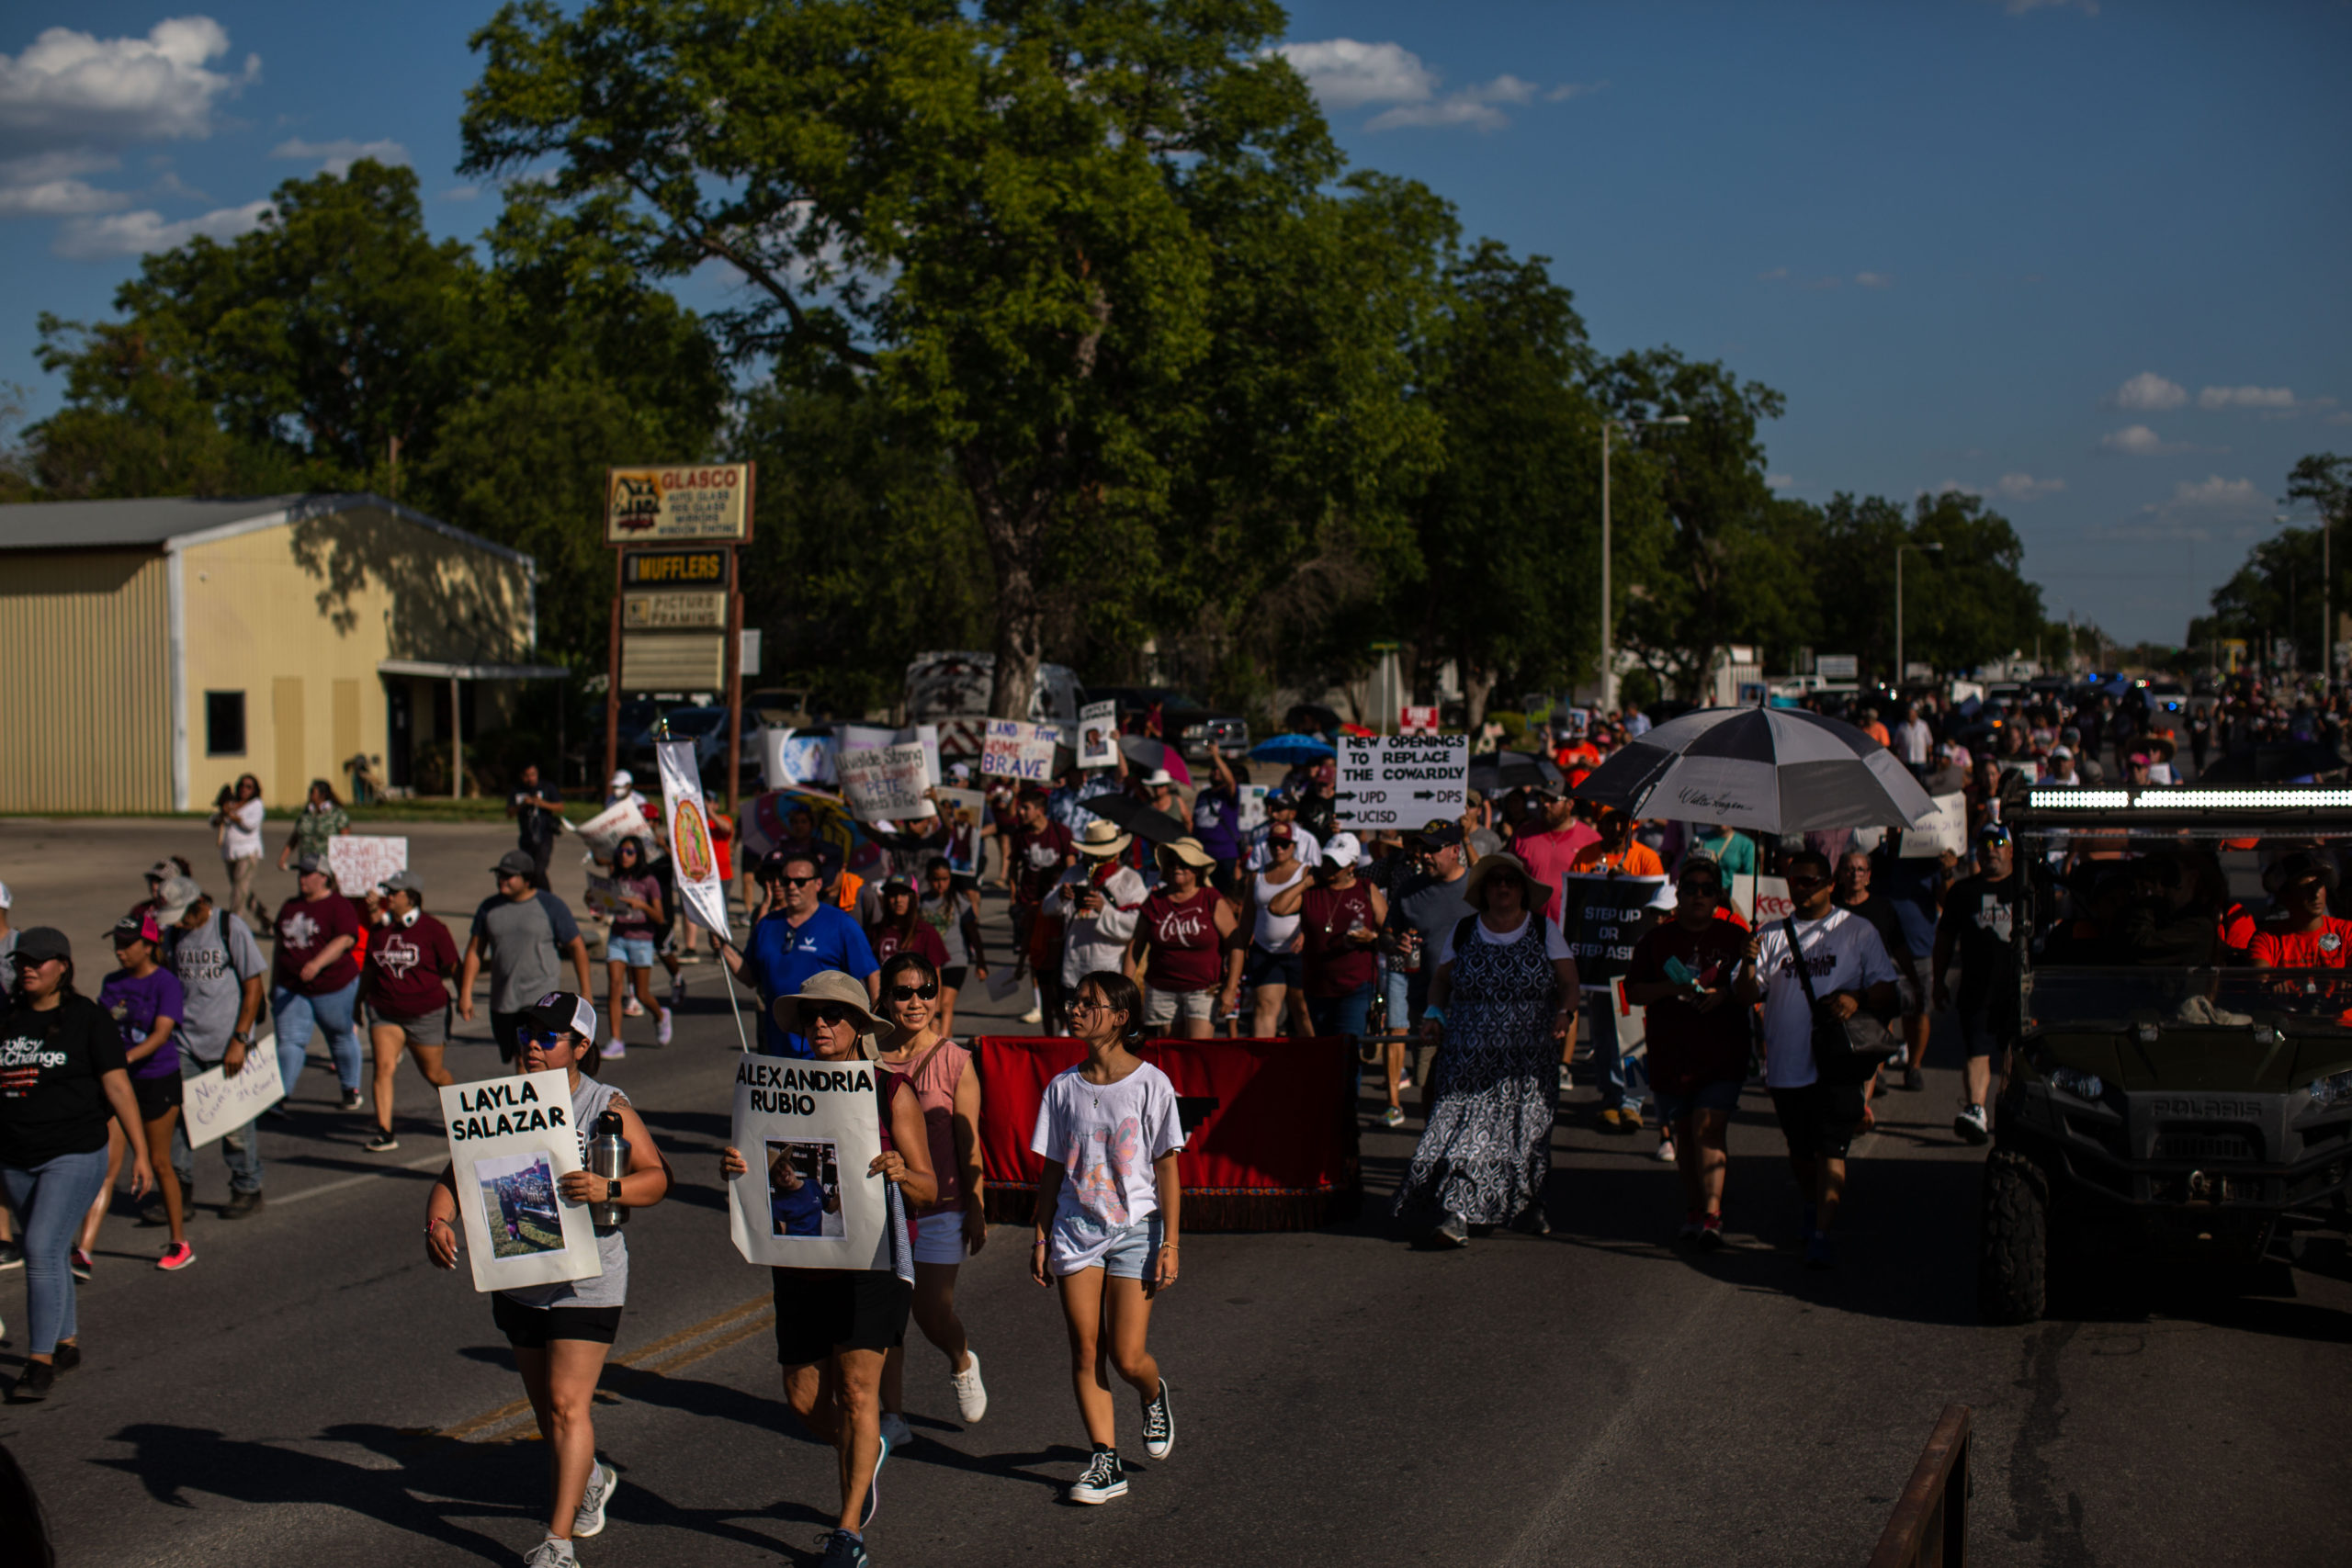 | THE CROWD MARCHES ALONG GETTY STREET ON JULY 10 KAYLEE GREENLEE BEALTEXAS OBSERVER | MR Online